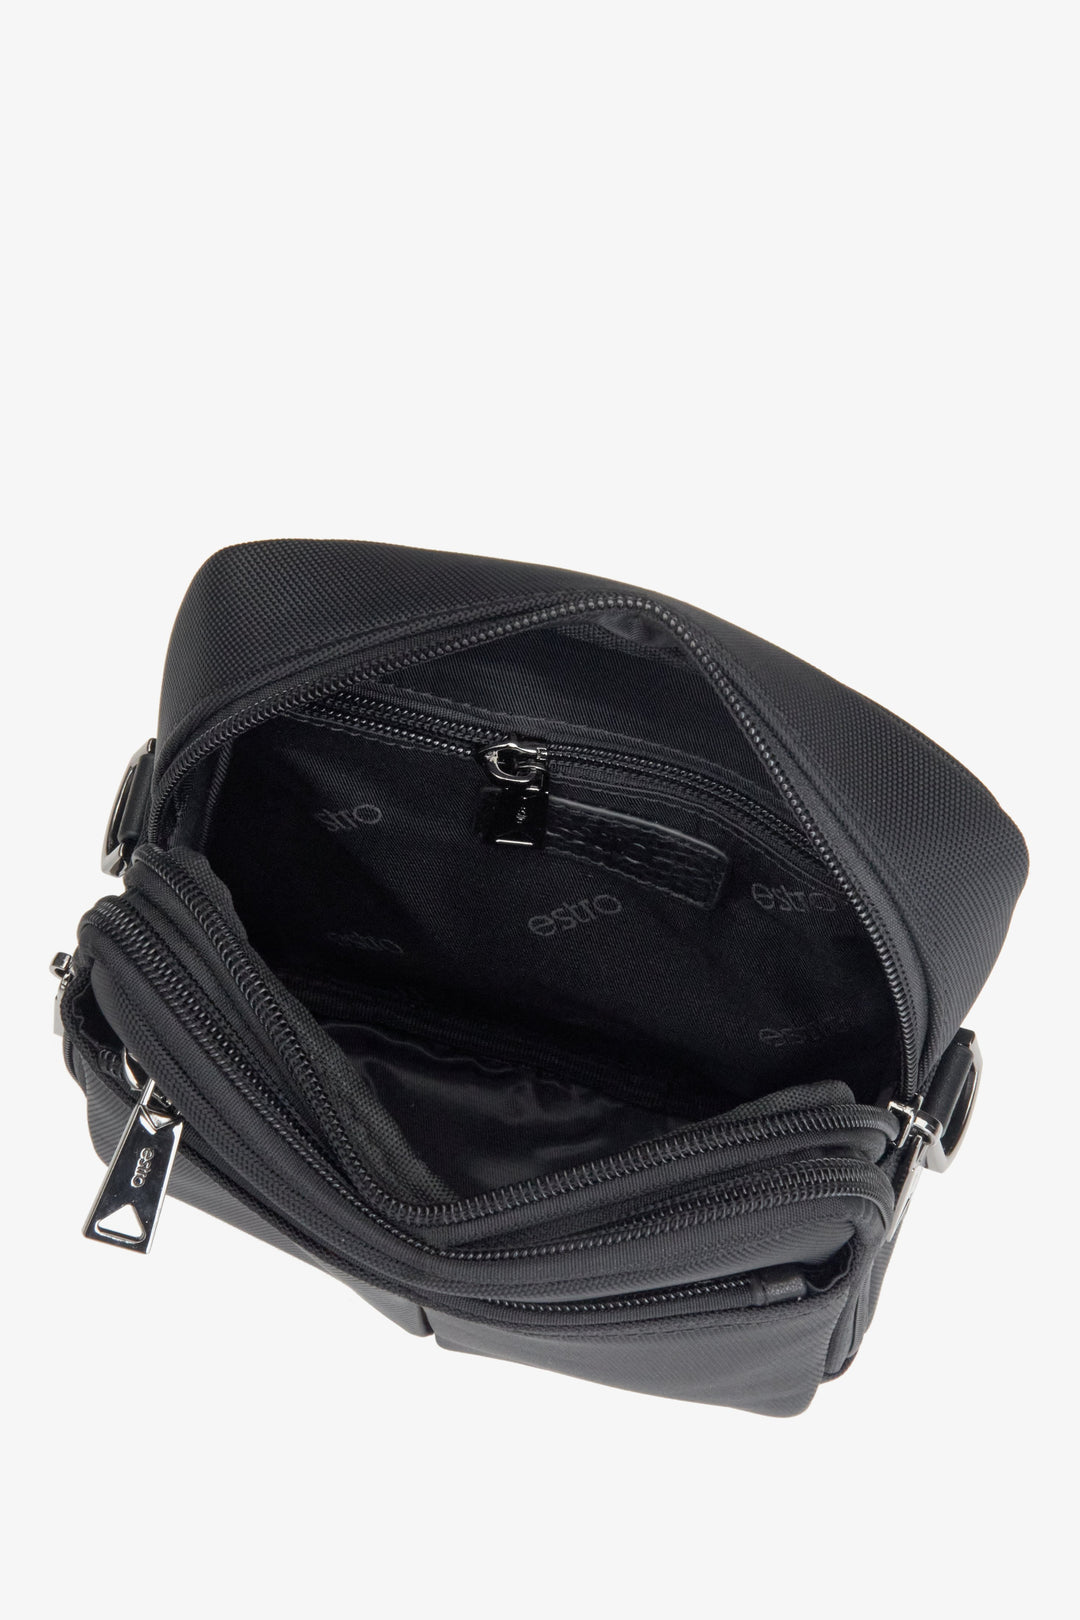  Close-up on the interior of the men's  black bag by Estro.